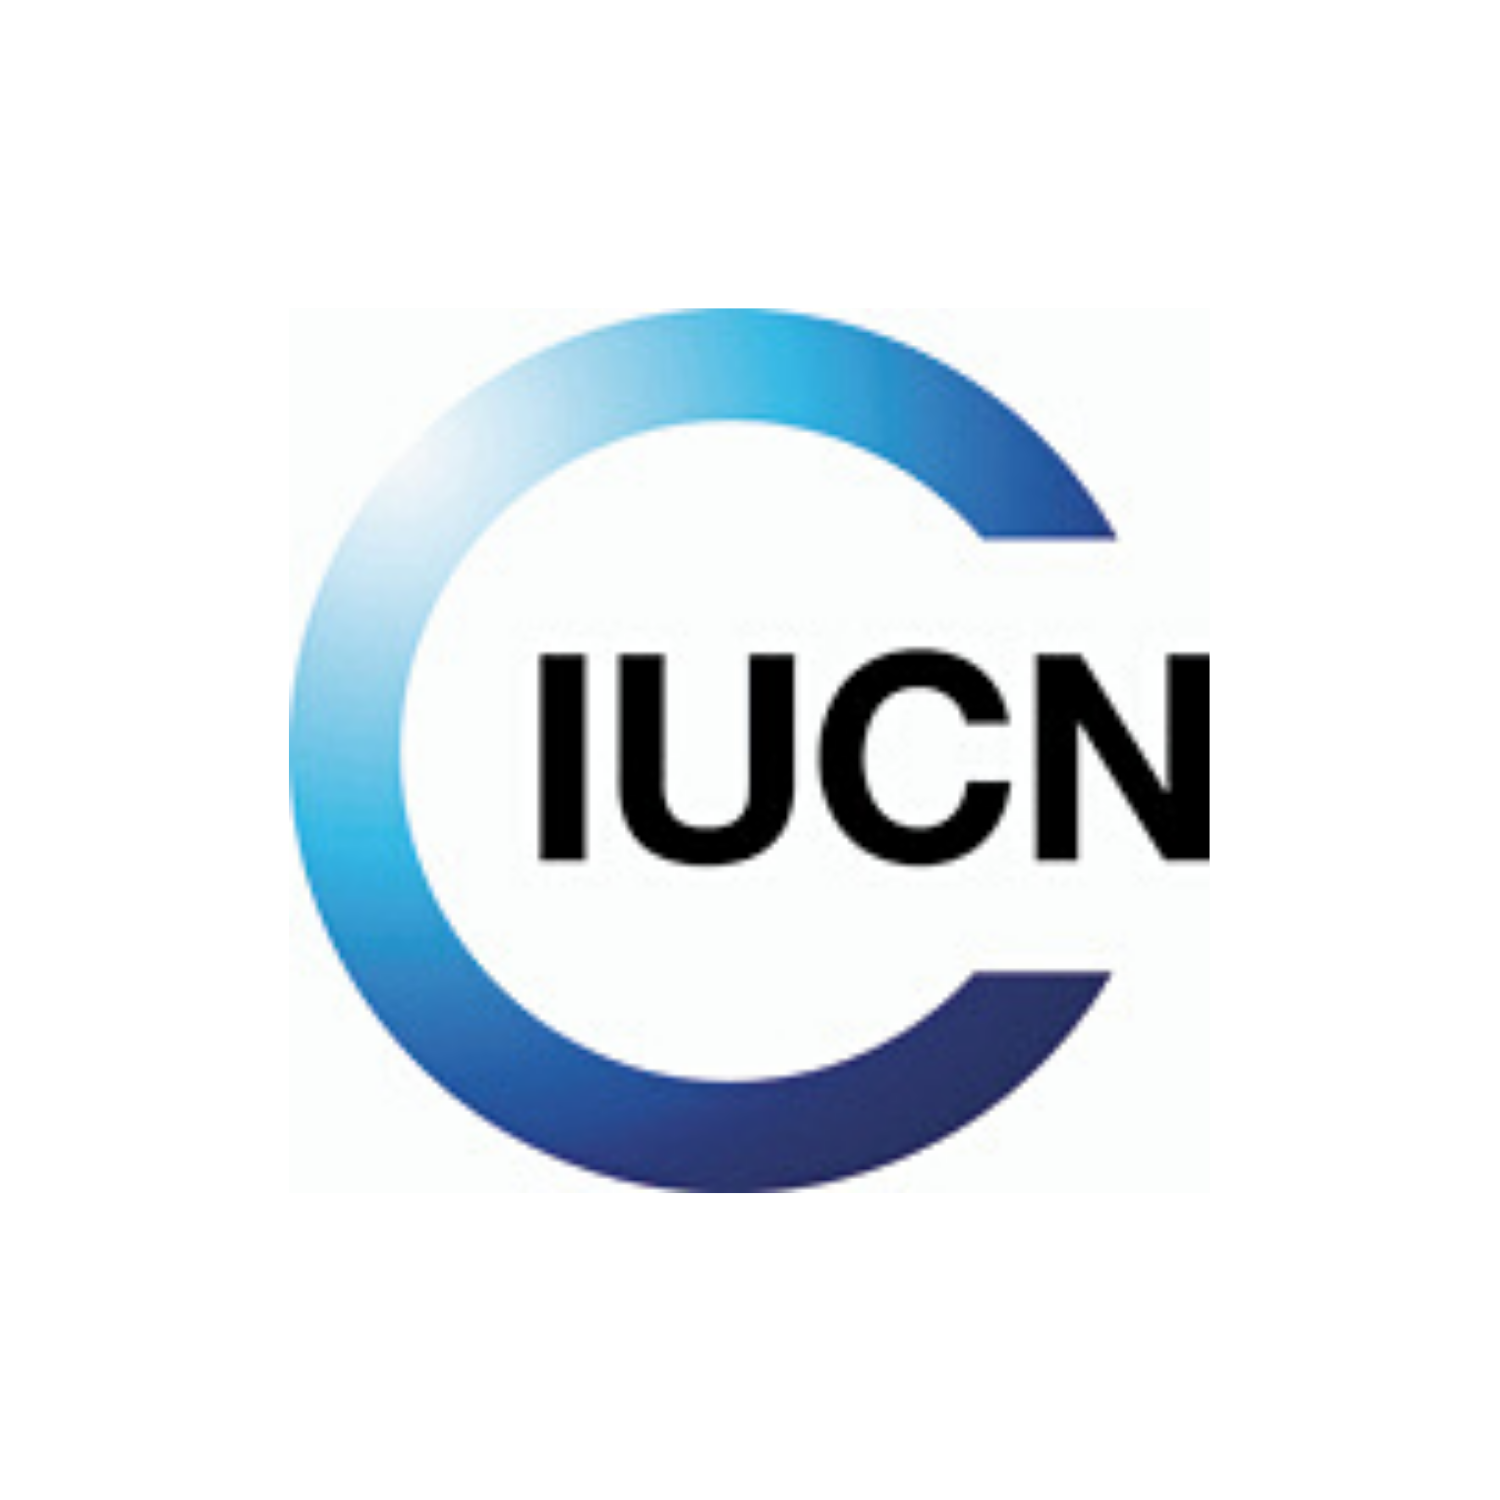 iucn_resize.png